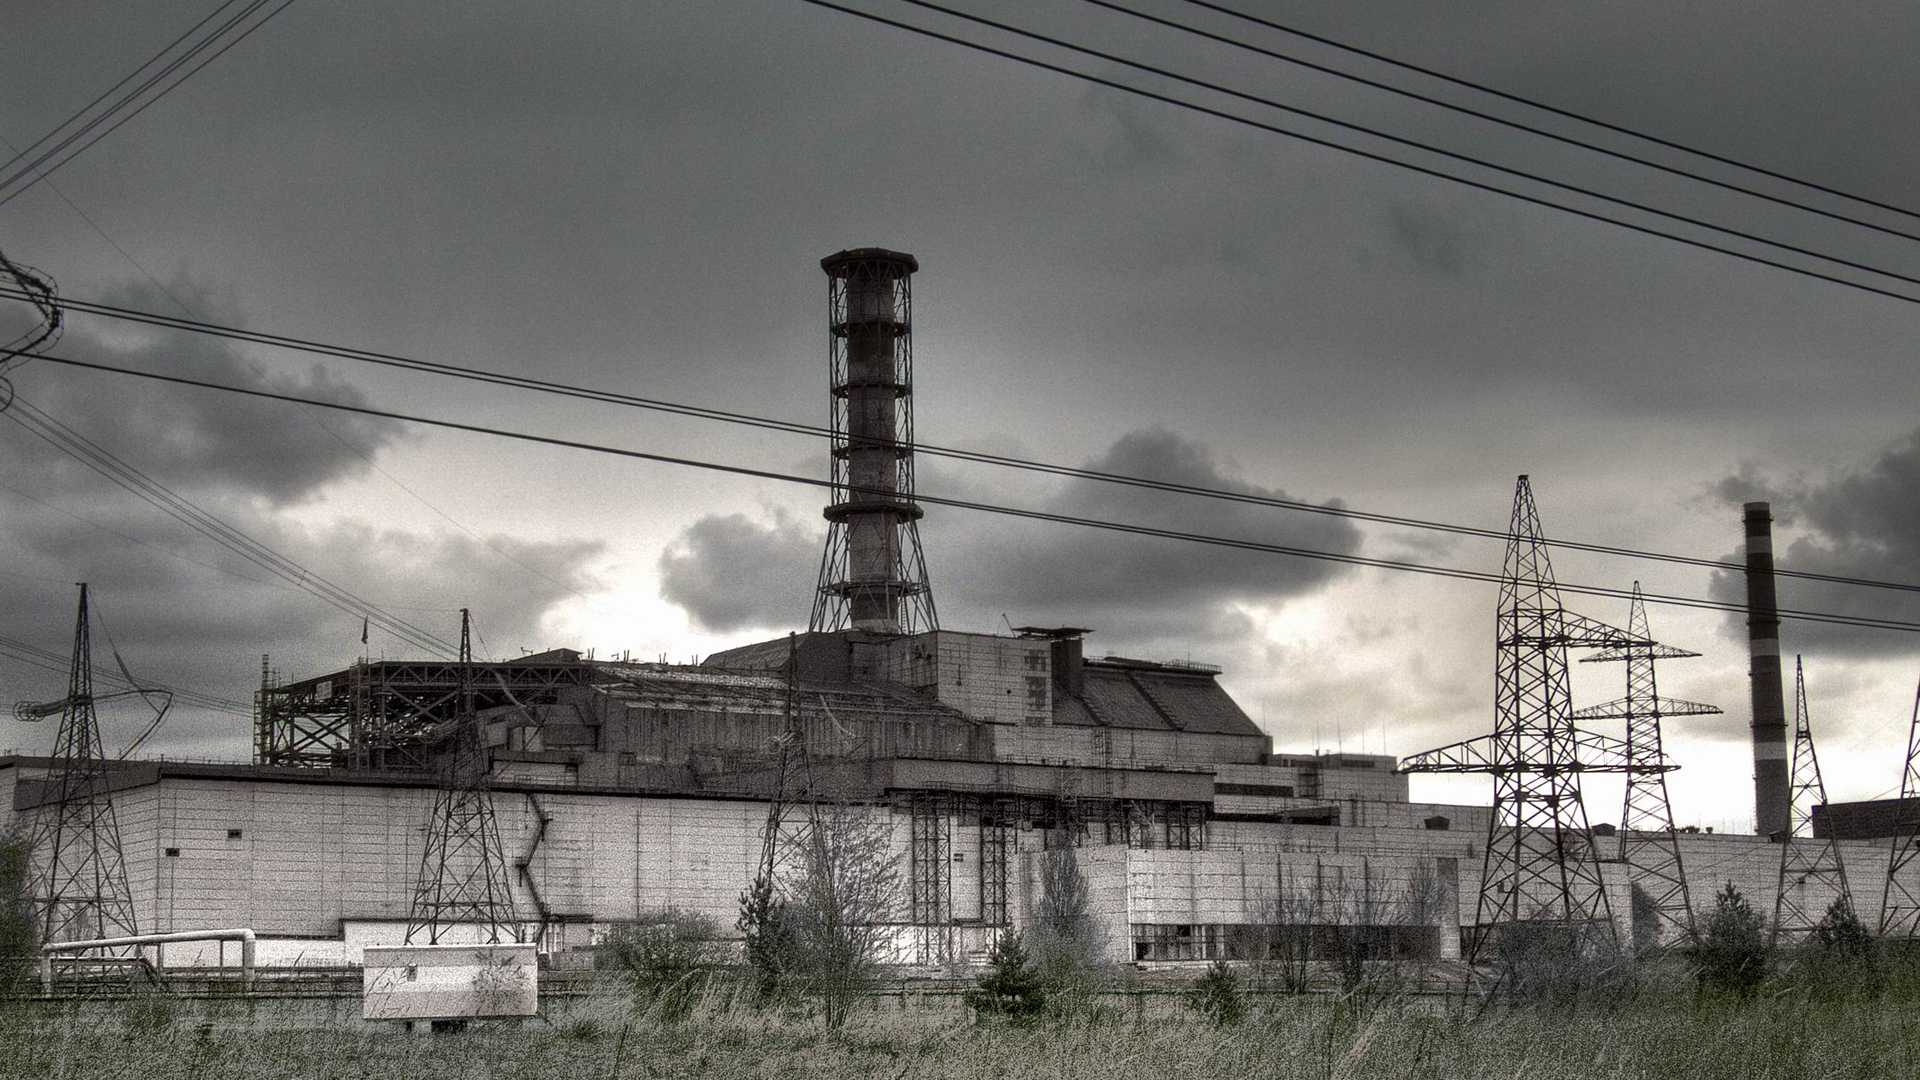 chernobyl, Reactor, Nuclear, Radiation, Destruction, Ruin, Decay, Urban, Factory, Buildings, Black, White, Bw Wallpaper